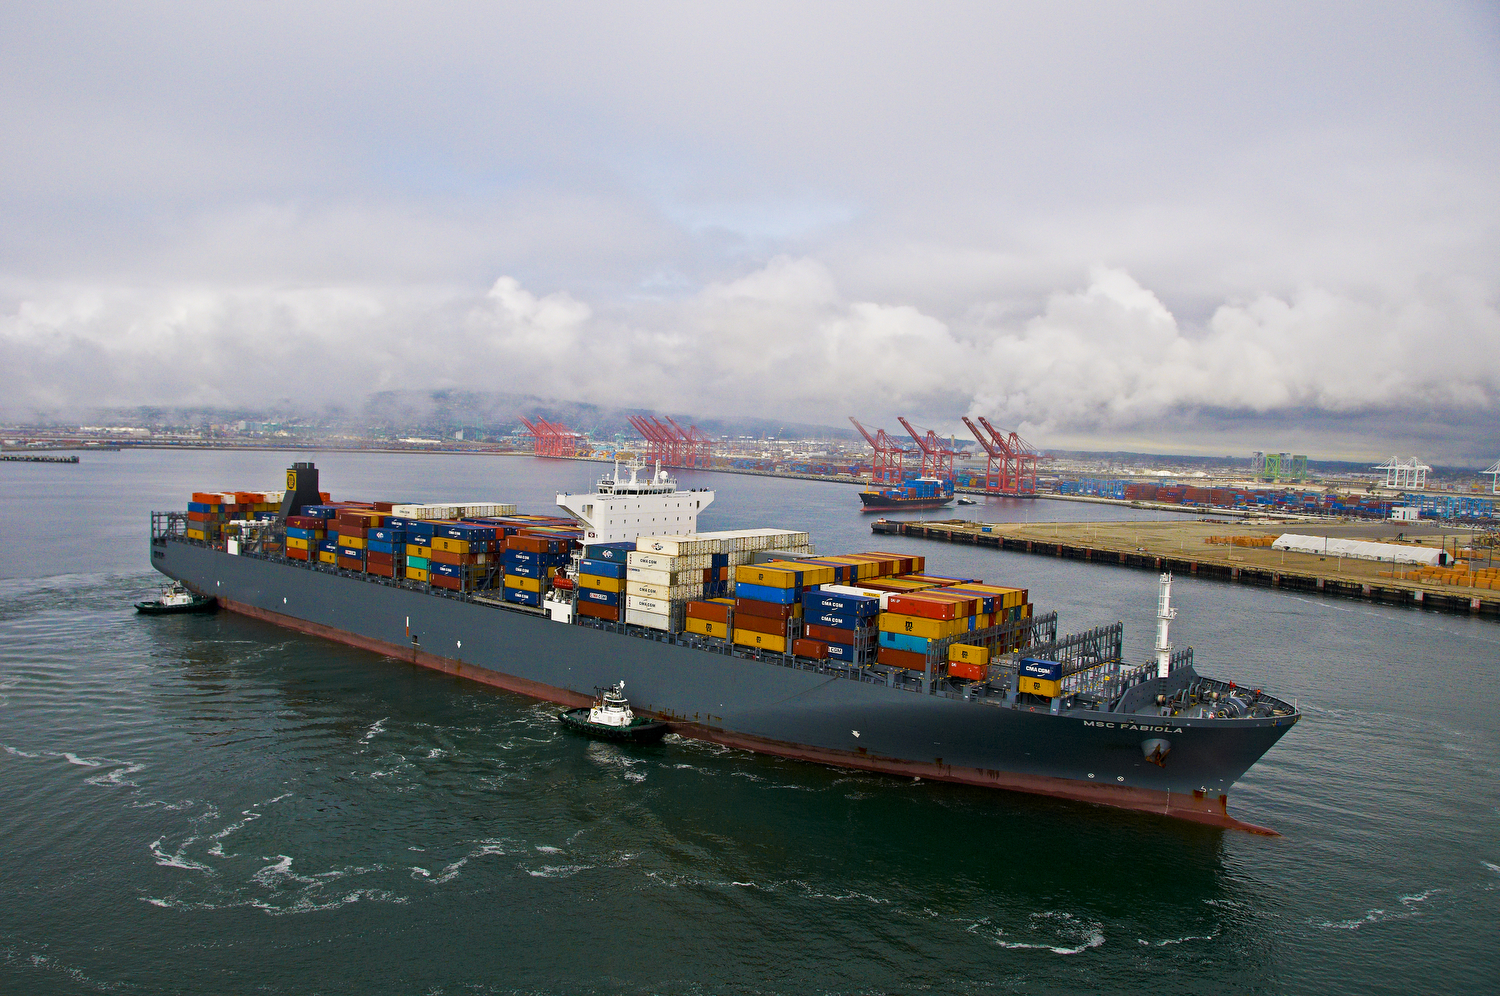 Some notable vessel calls in the 2010s: The MSC Fabiola, at the time the largest container ship ever to come to North America, came to Long Beach's TTI terminal on March 16, 2012.